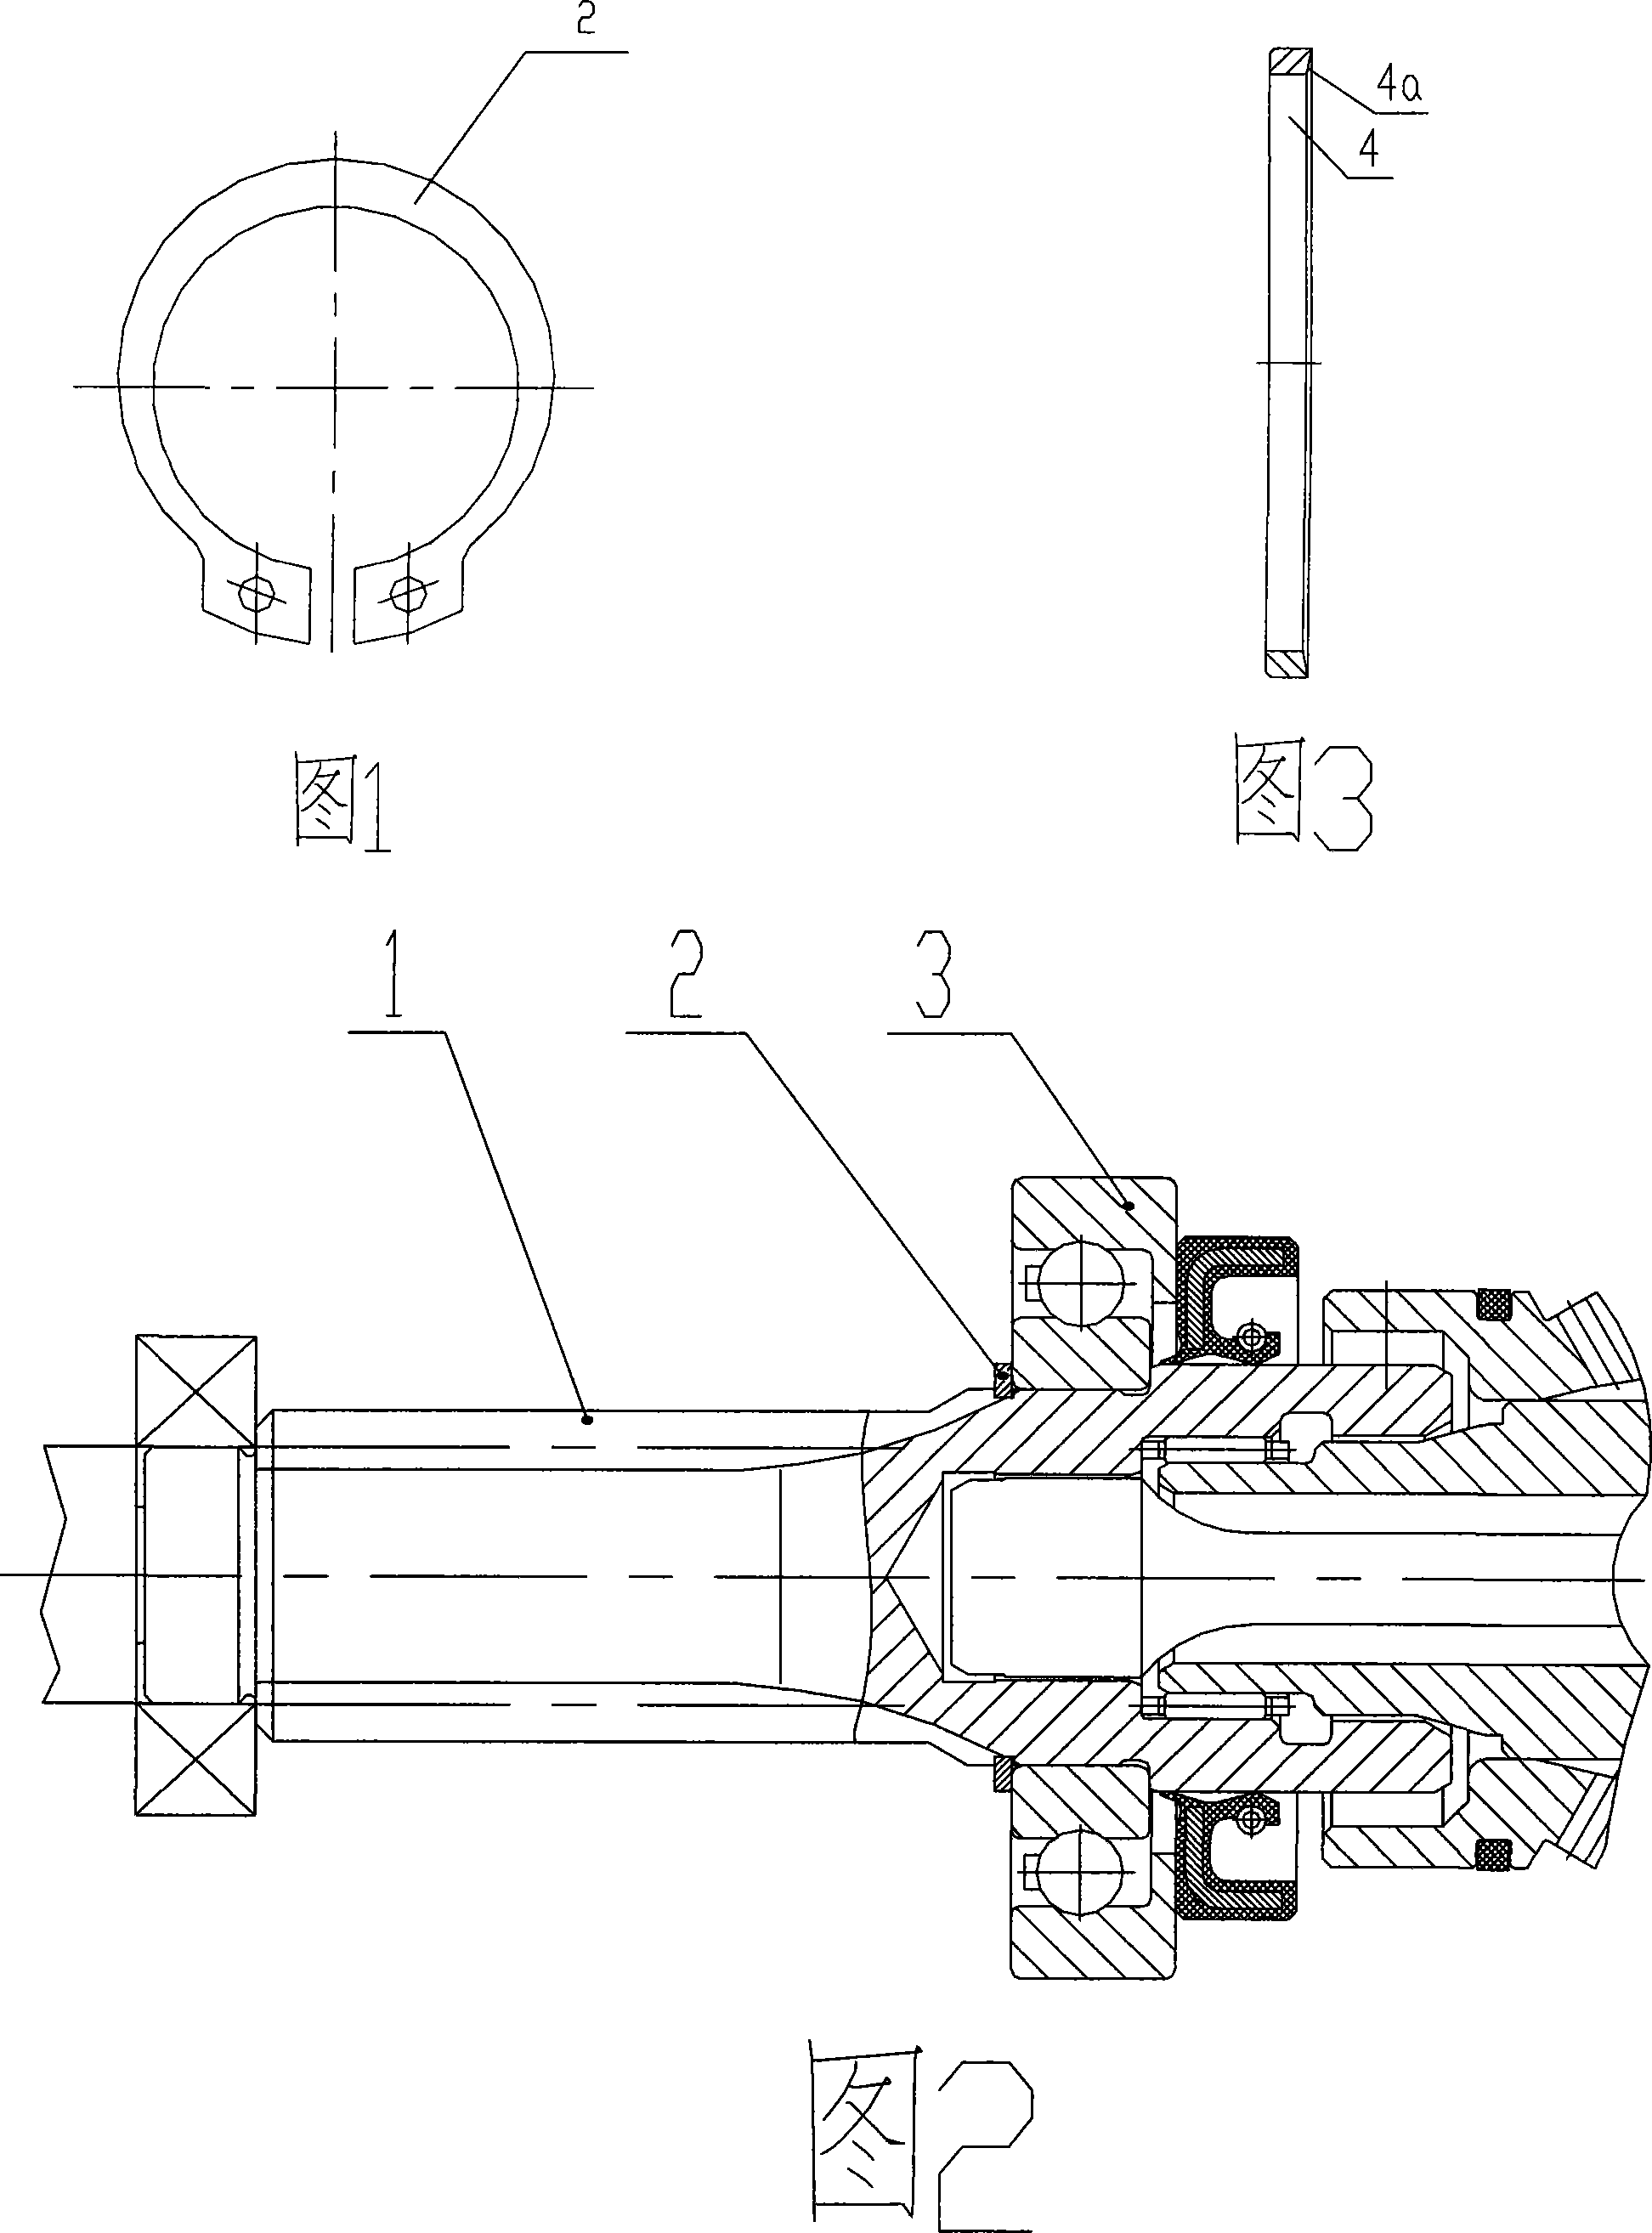 Method for fixed upper bearing of axial parts